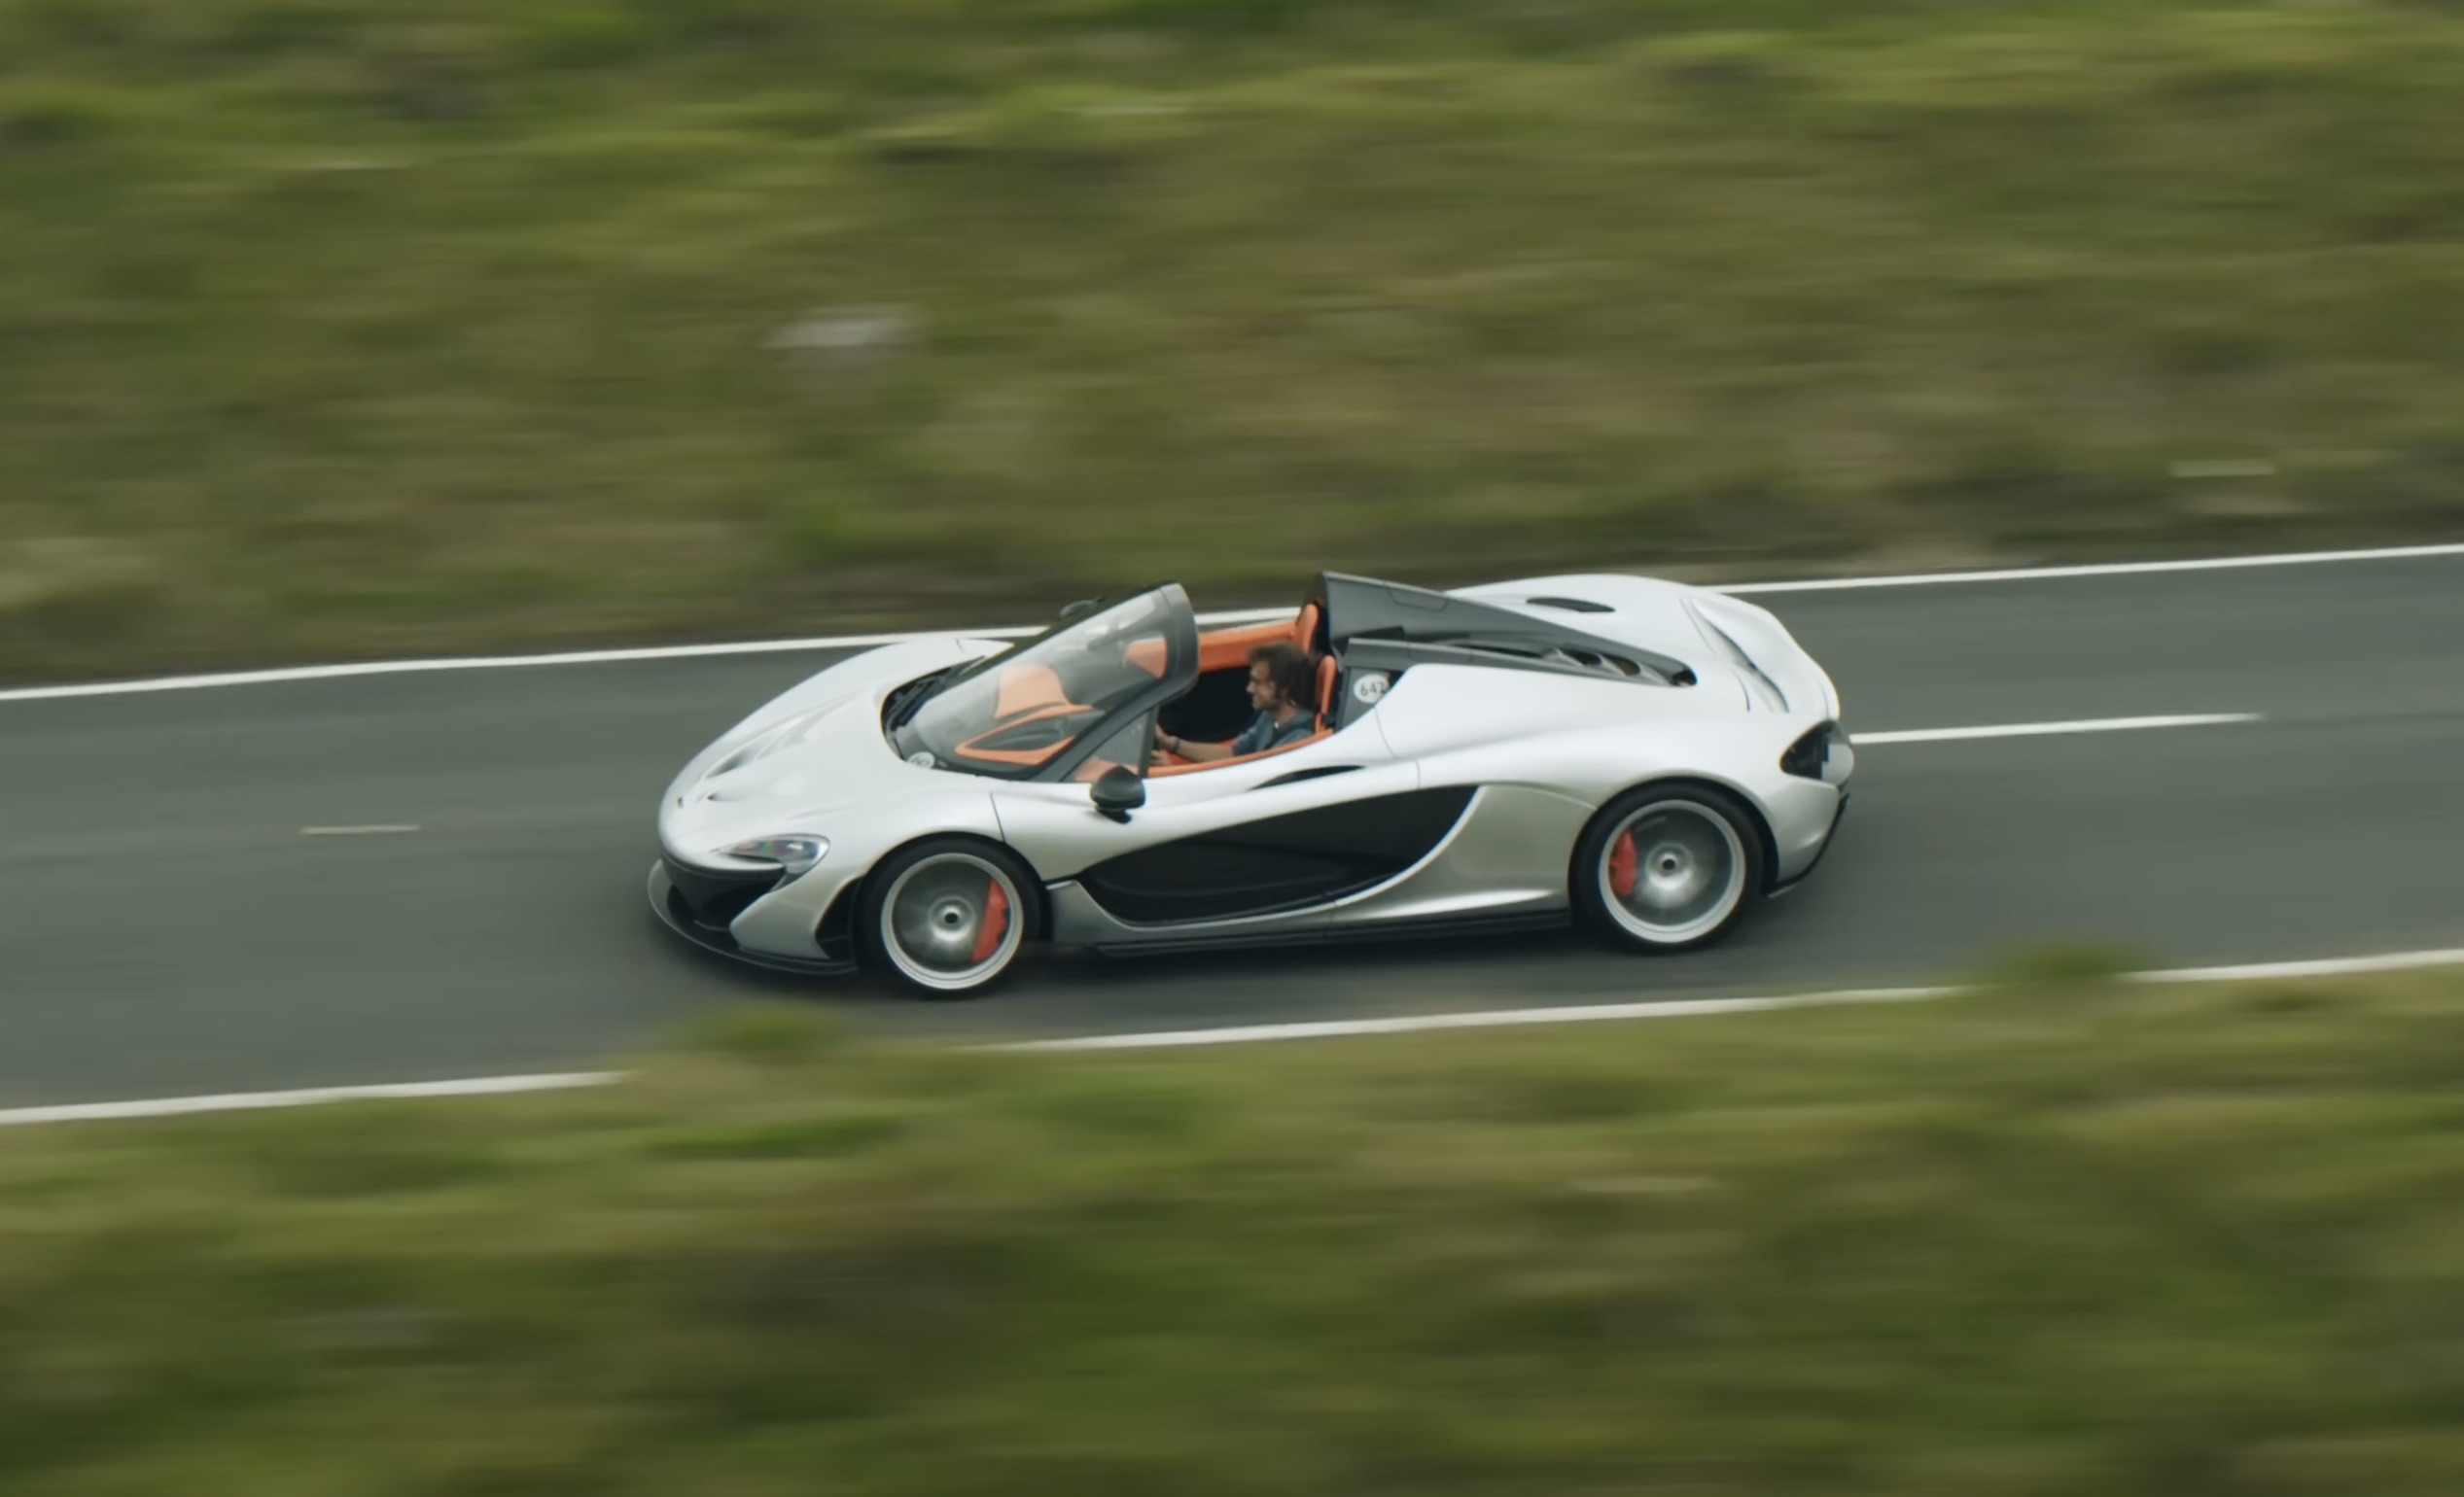 Along came a Spider: Henry Catchpole drives the only open McLaren P1 in existence